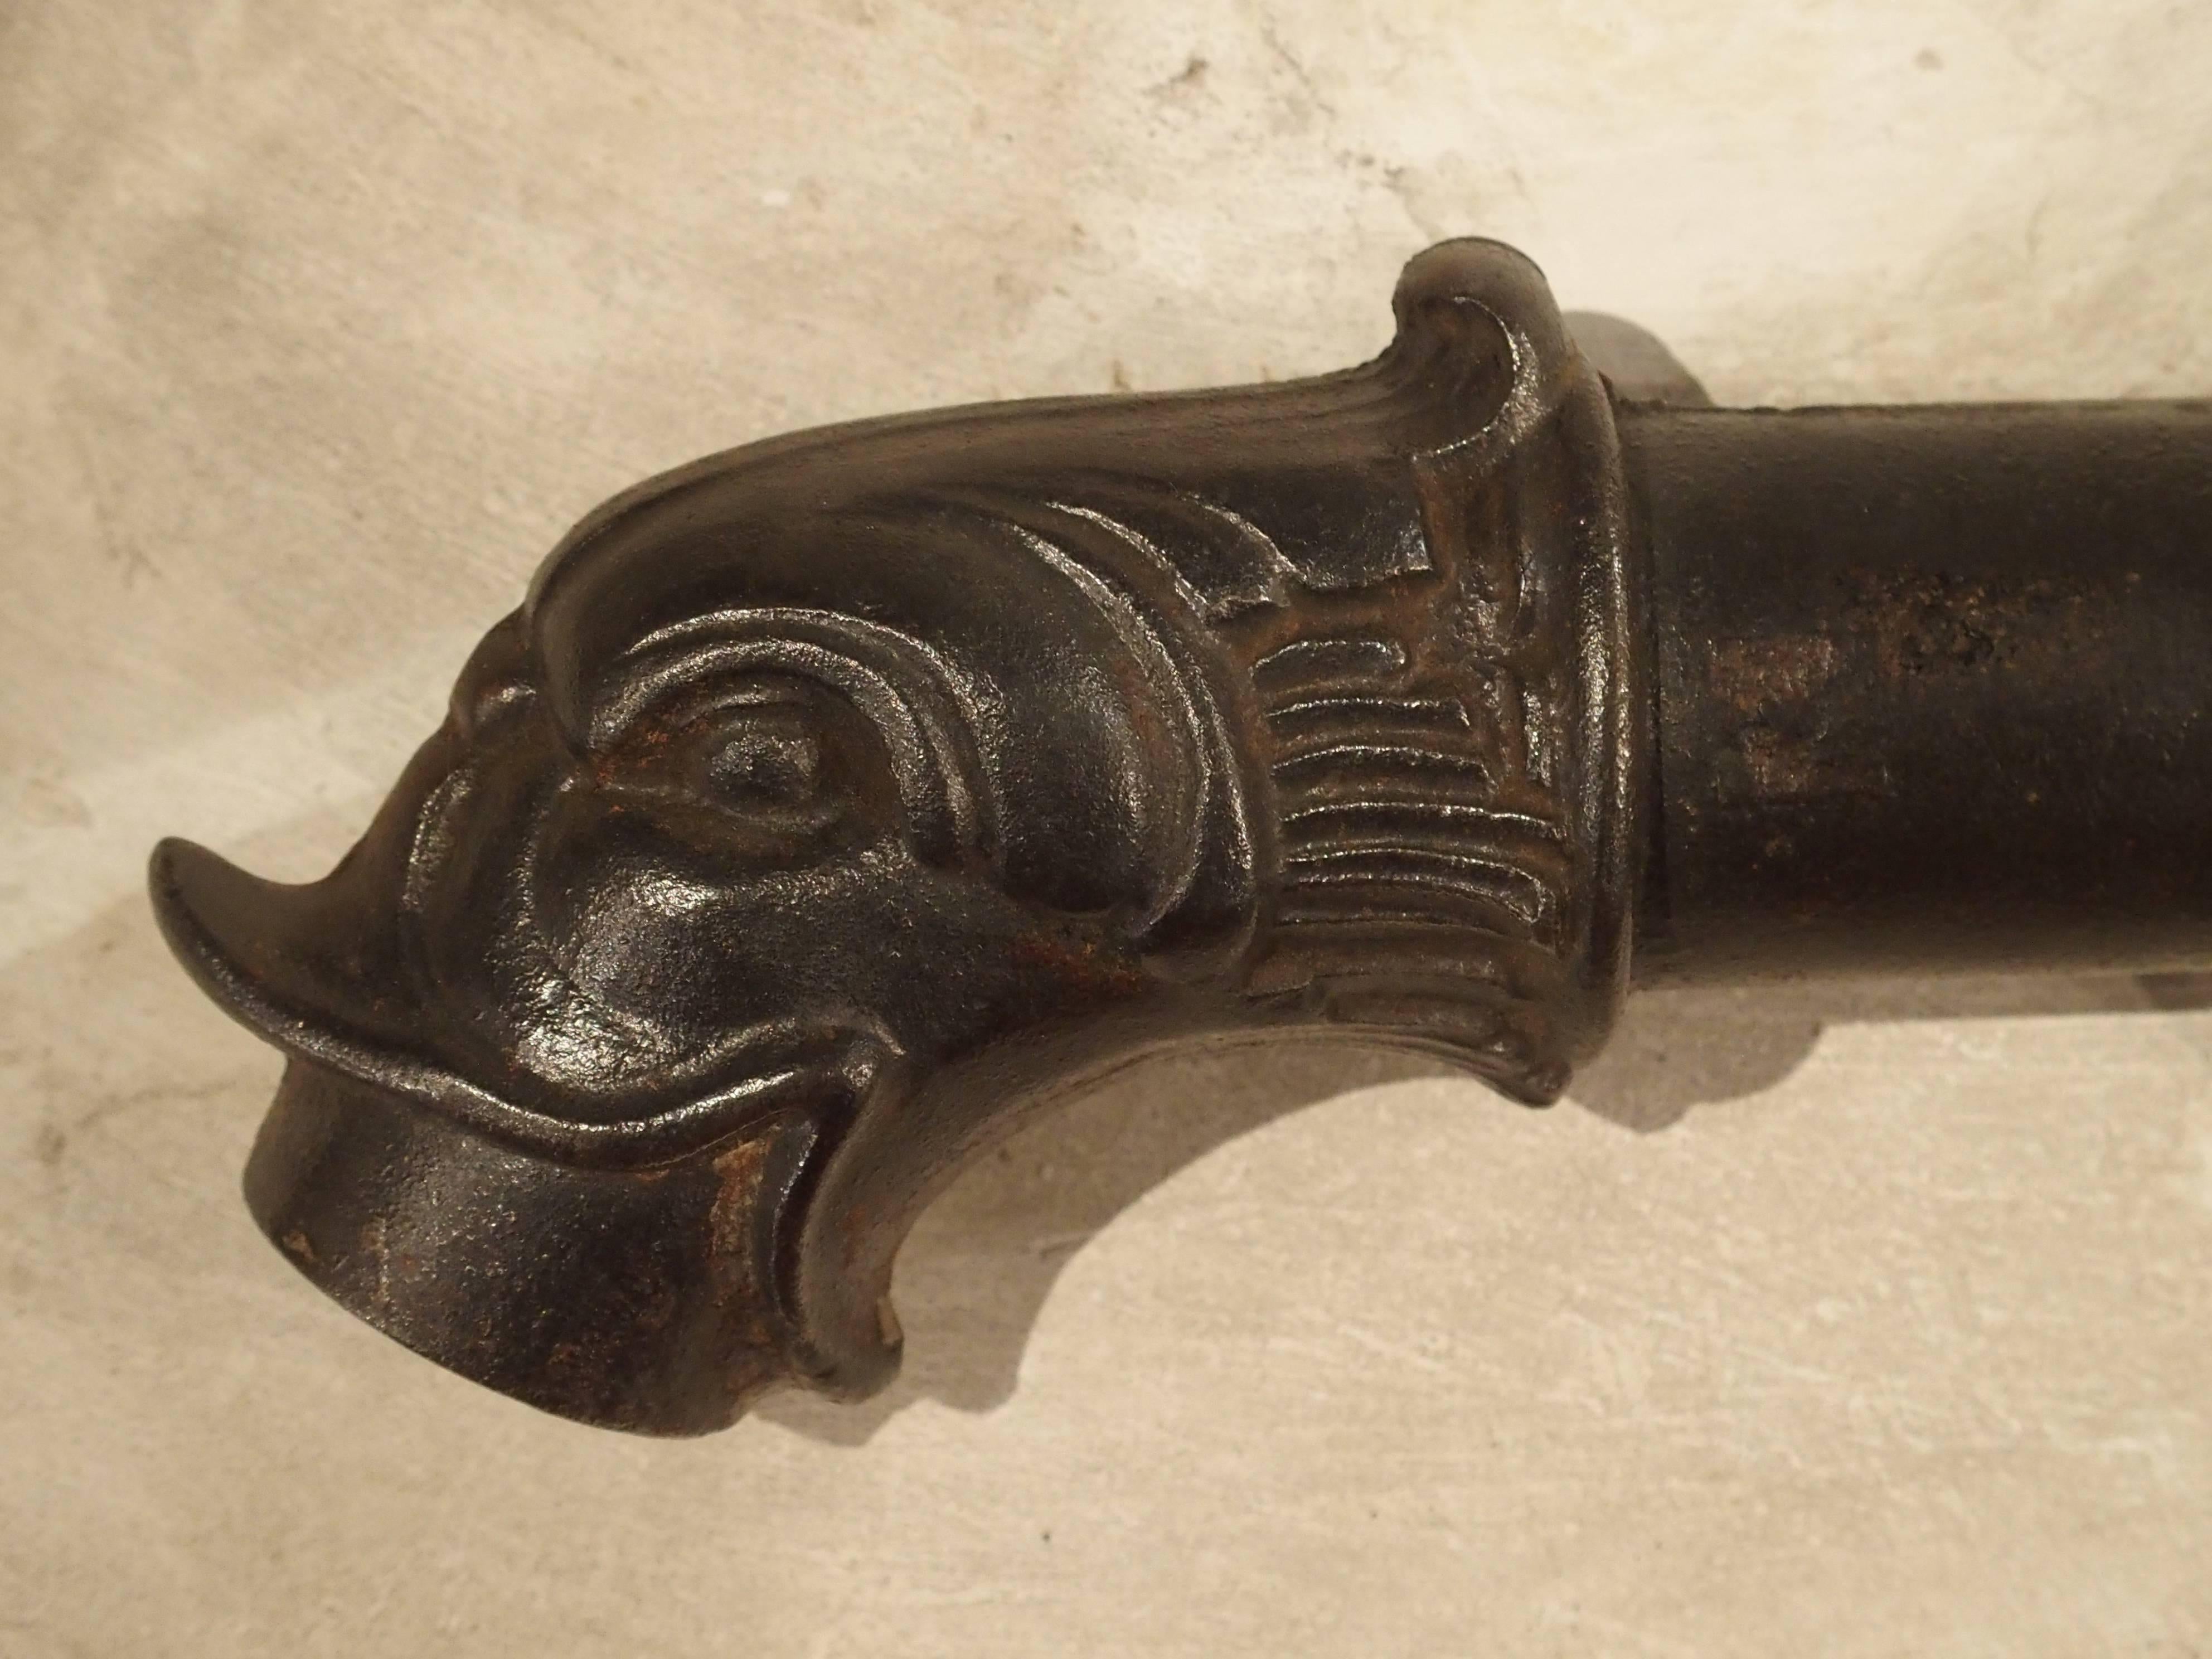 This antique French cast iron fountain spout has a stylized dolphin motif at the spout. When France was ruled by Kings, the heir to the throne was known as the Dauphin (Dolphin in French), therefore we see the dolphin motif used throughout many